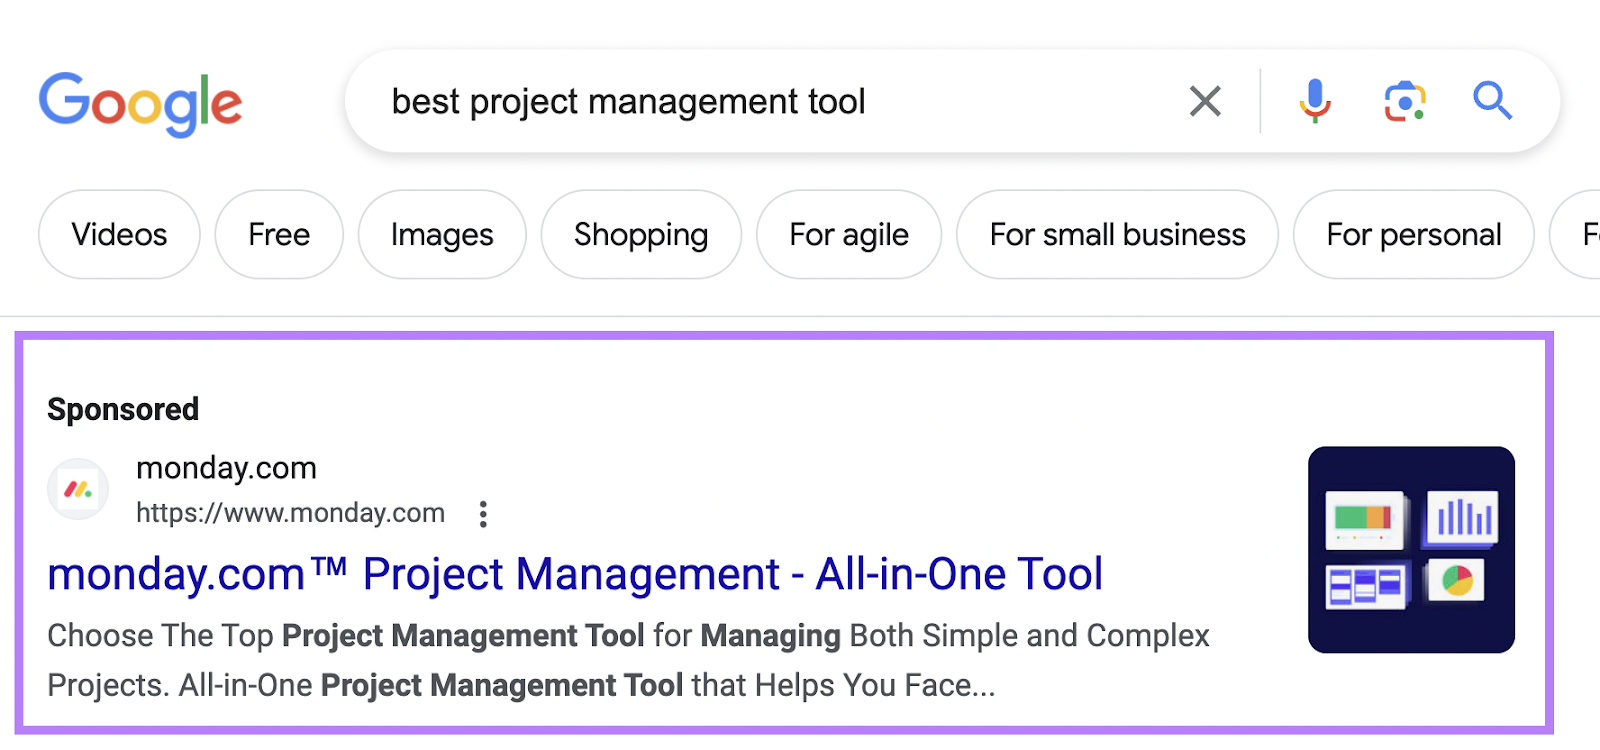 Monday.com's Google search ad for “best project management software" query